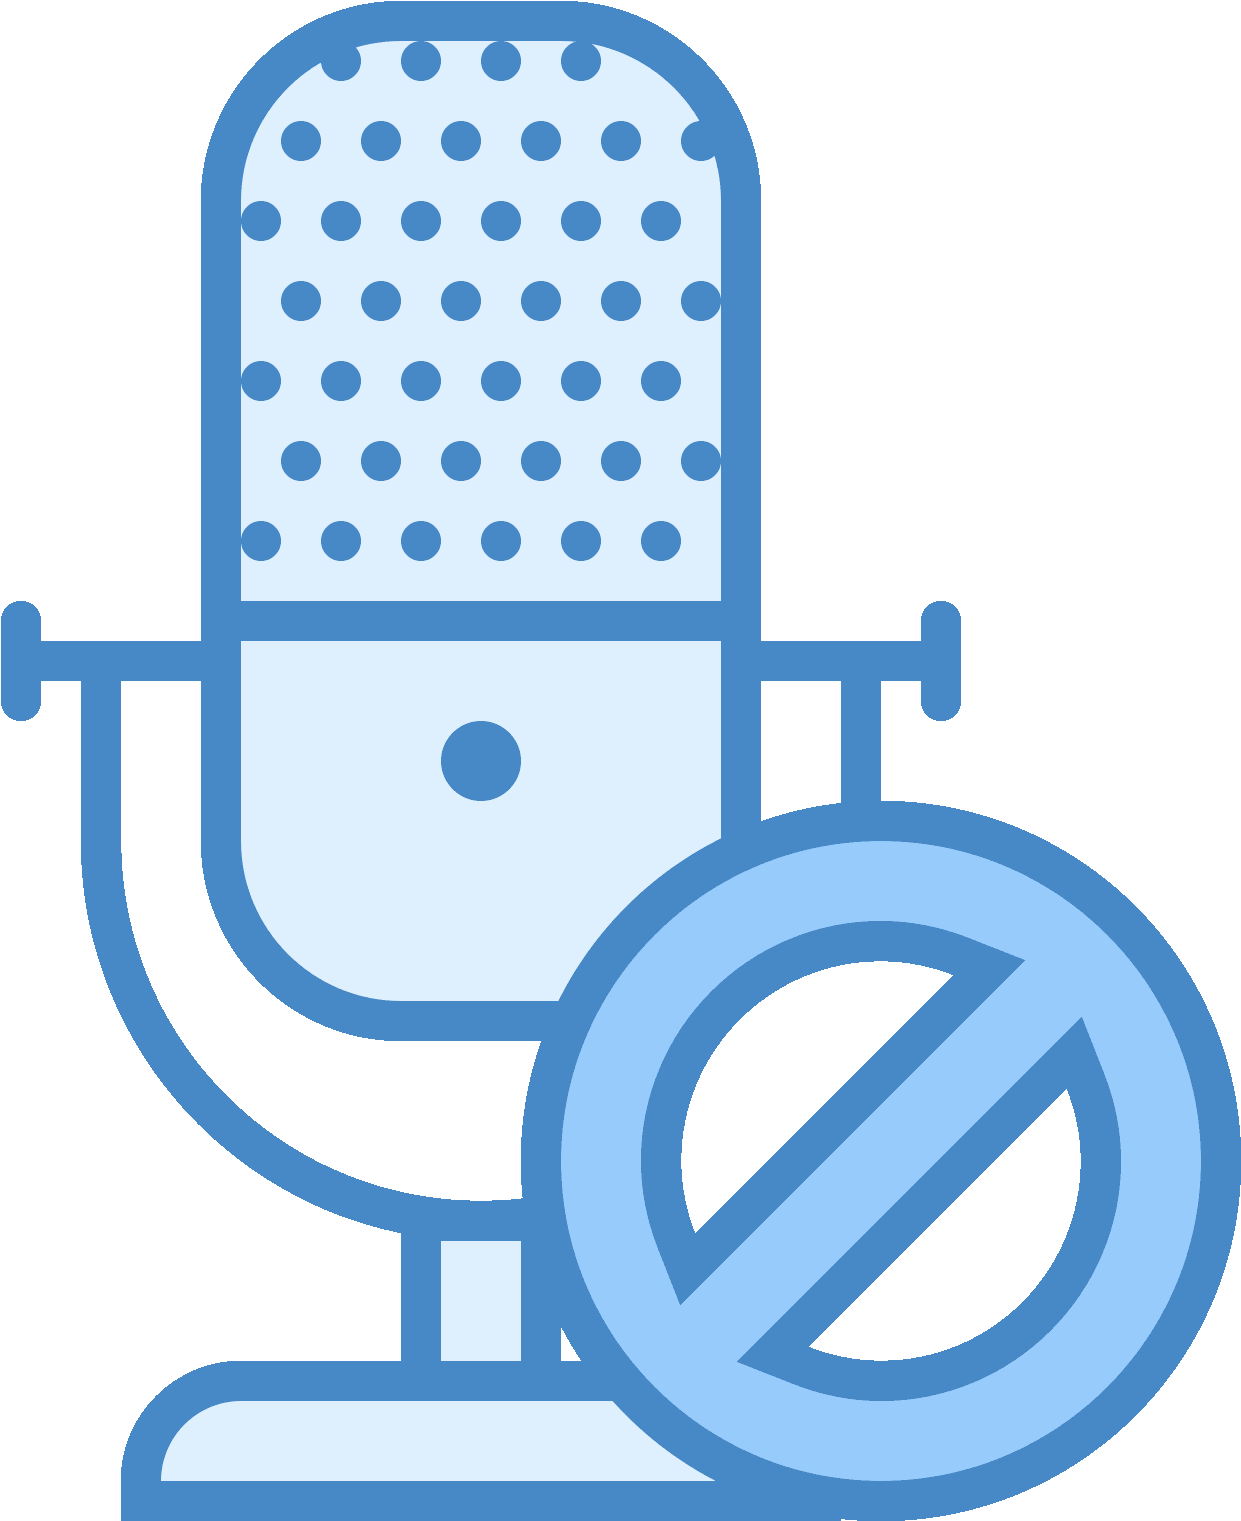 A Blue And White Microphone With A No Sign